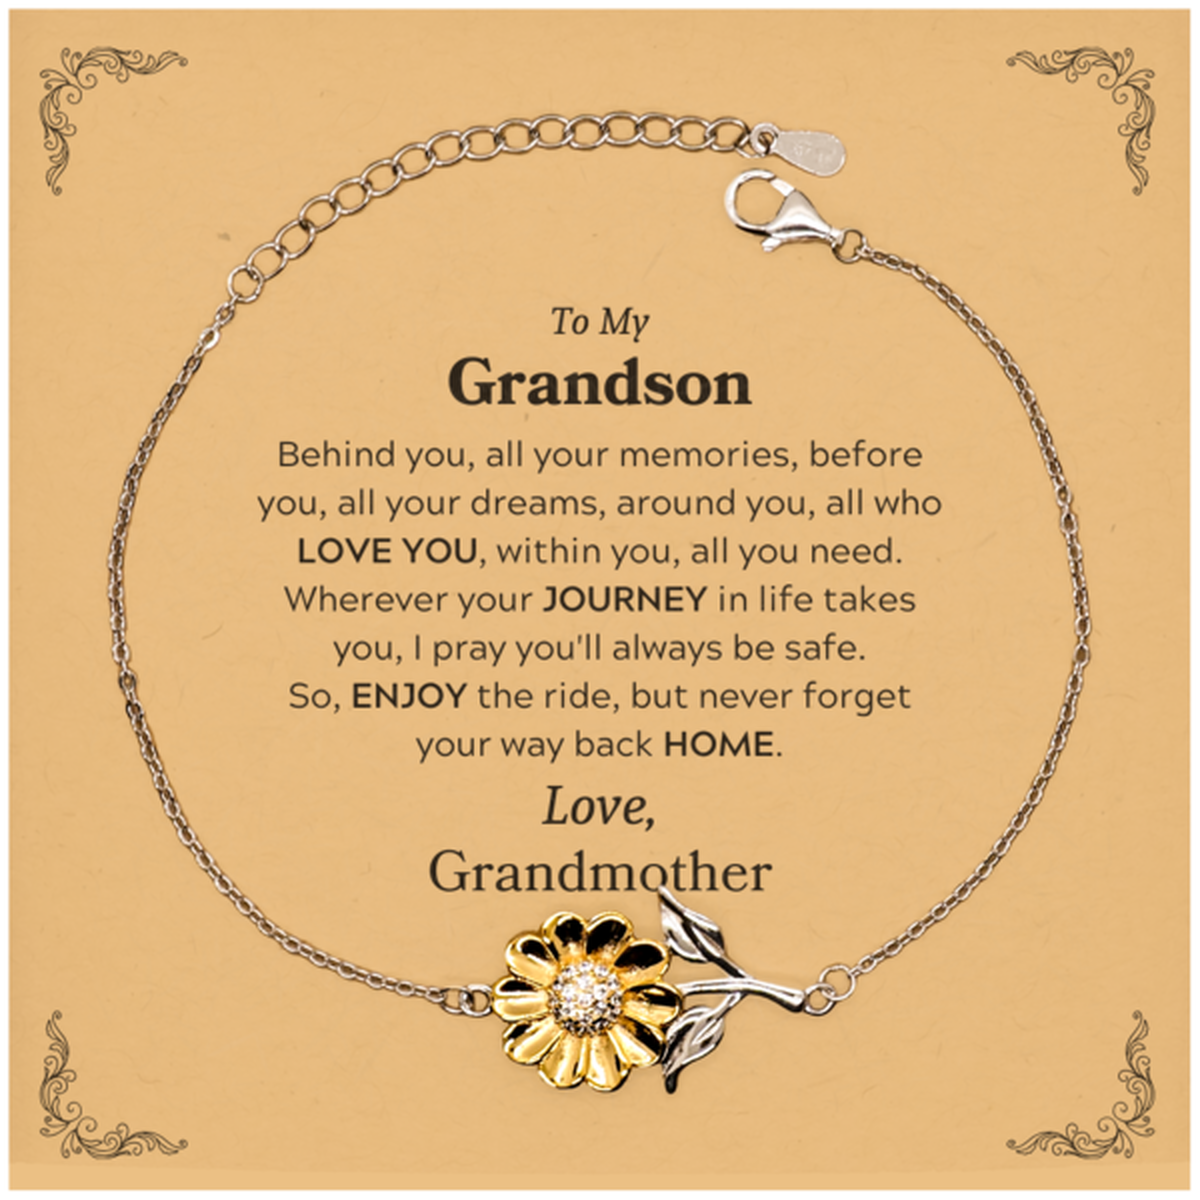 To My Grandson Graduation Gifts from Grandmother, Grandson Sunflower Bracelet Christmas Birthday Gifts for Grandson Behind you, all your memories, before you, all your dreams. Love, Grandmother